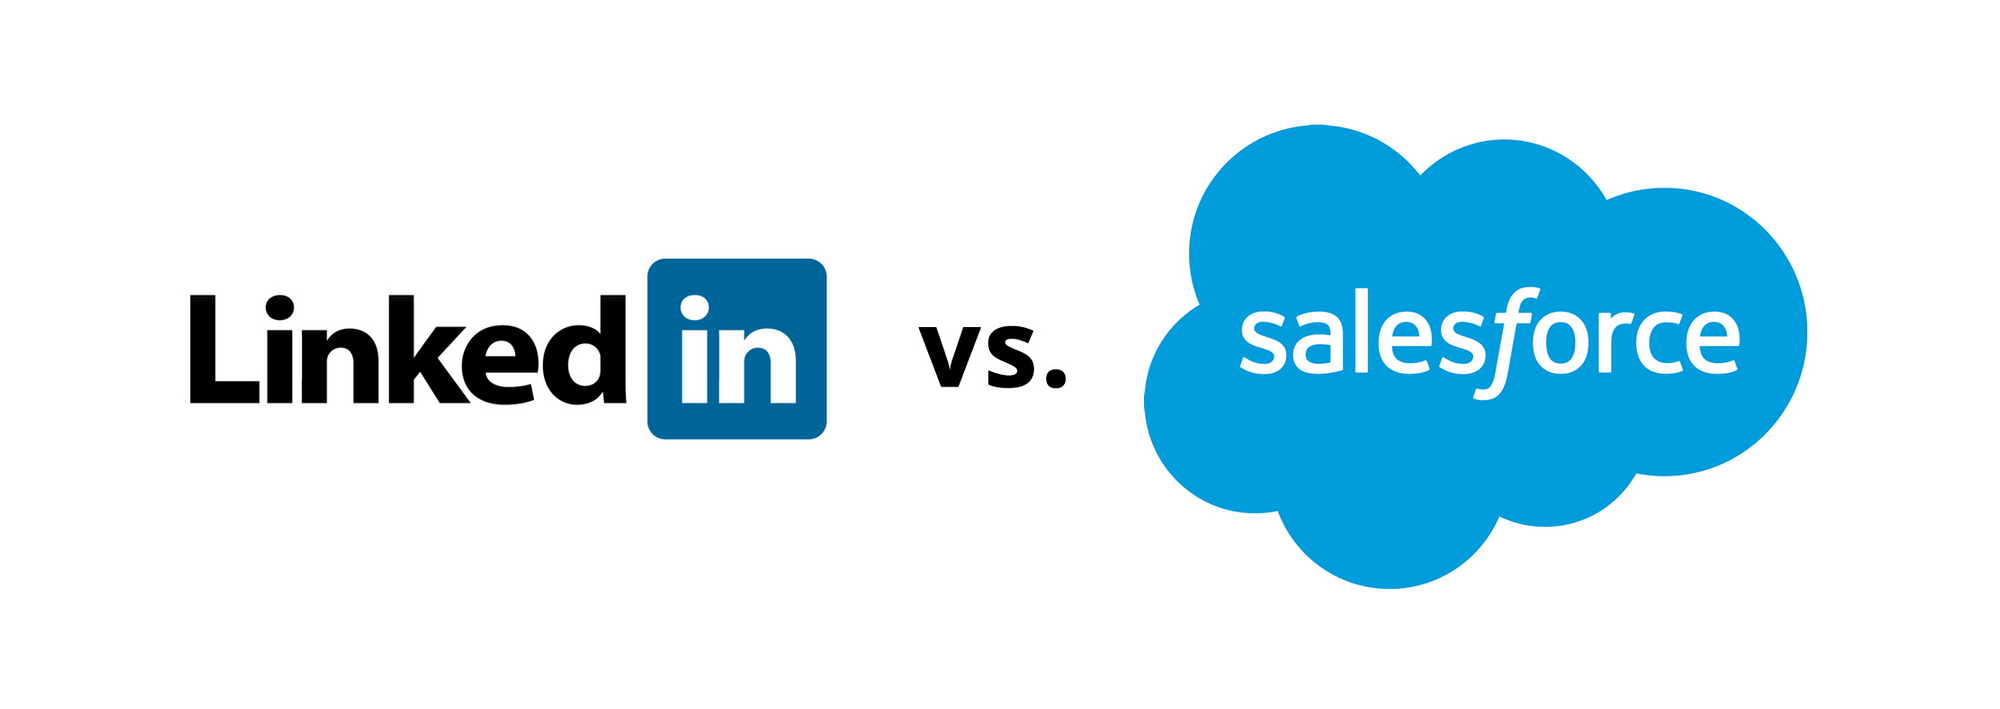 How Linkedin Blew Its Chance to Take on Salesforce.